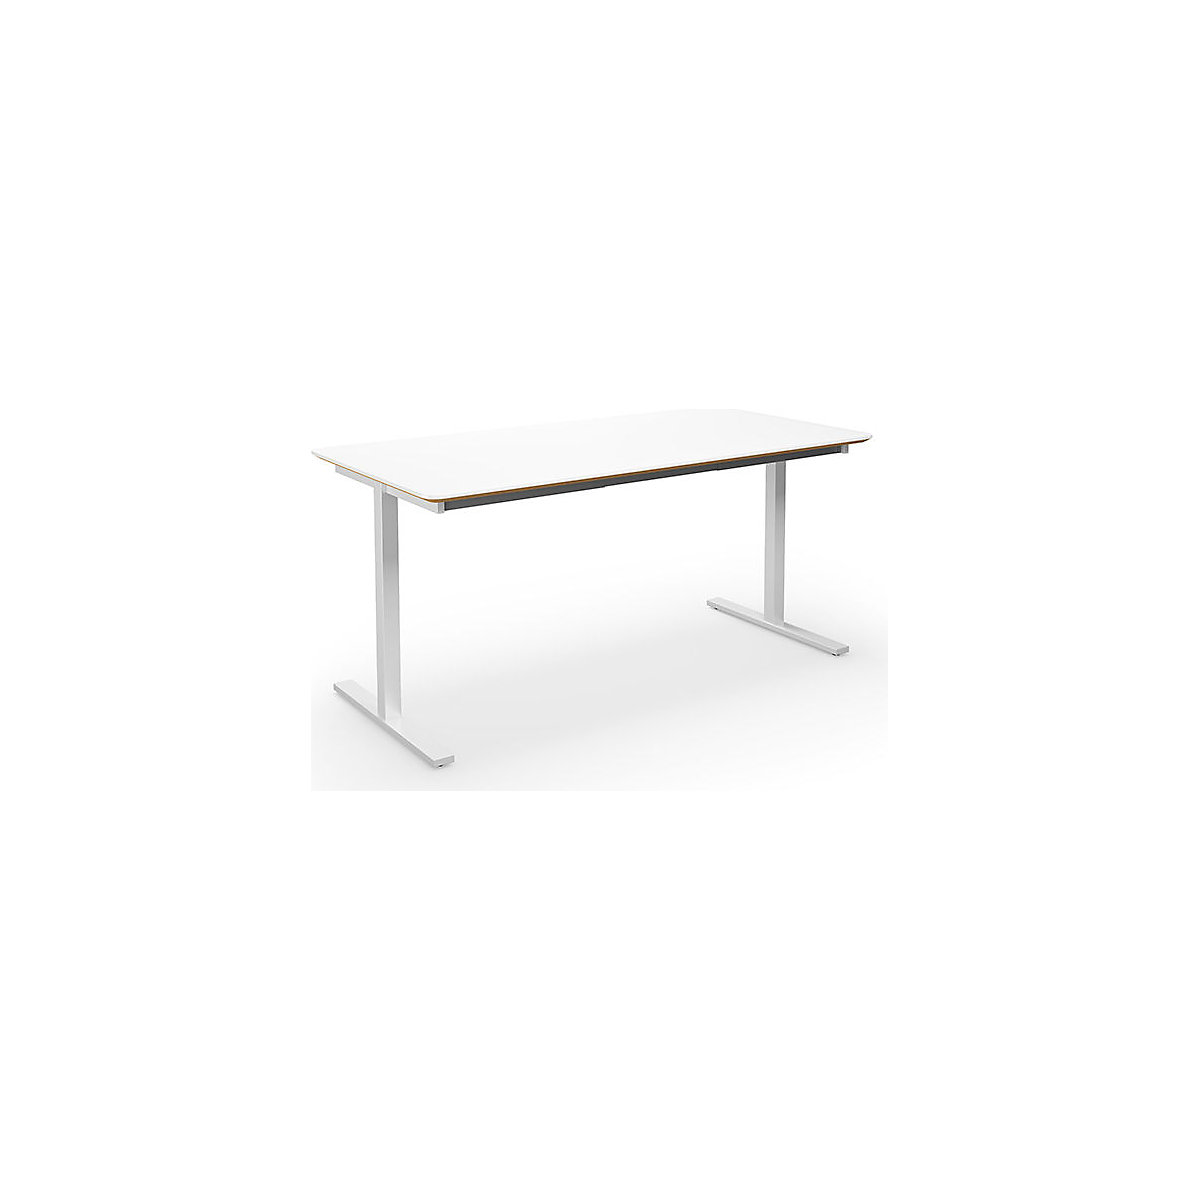 DUO-T Trend multi-purpose desk, straight tabletop, rounded corners, WxD 1600 x 800 mm, white, white-5